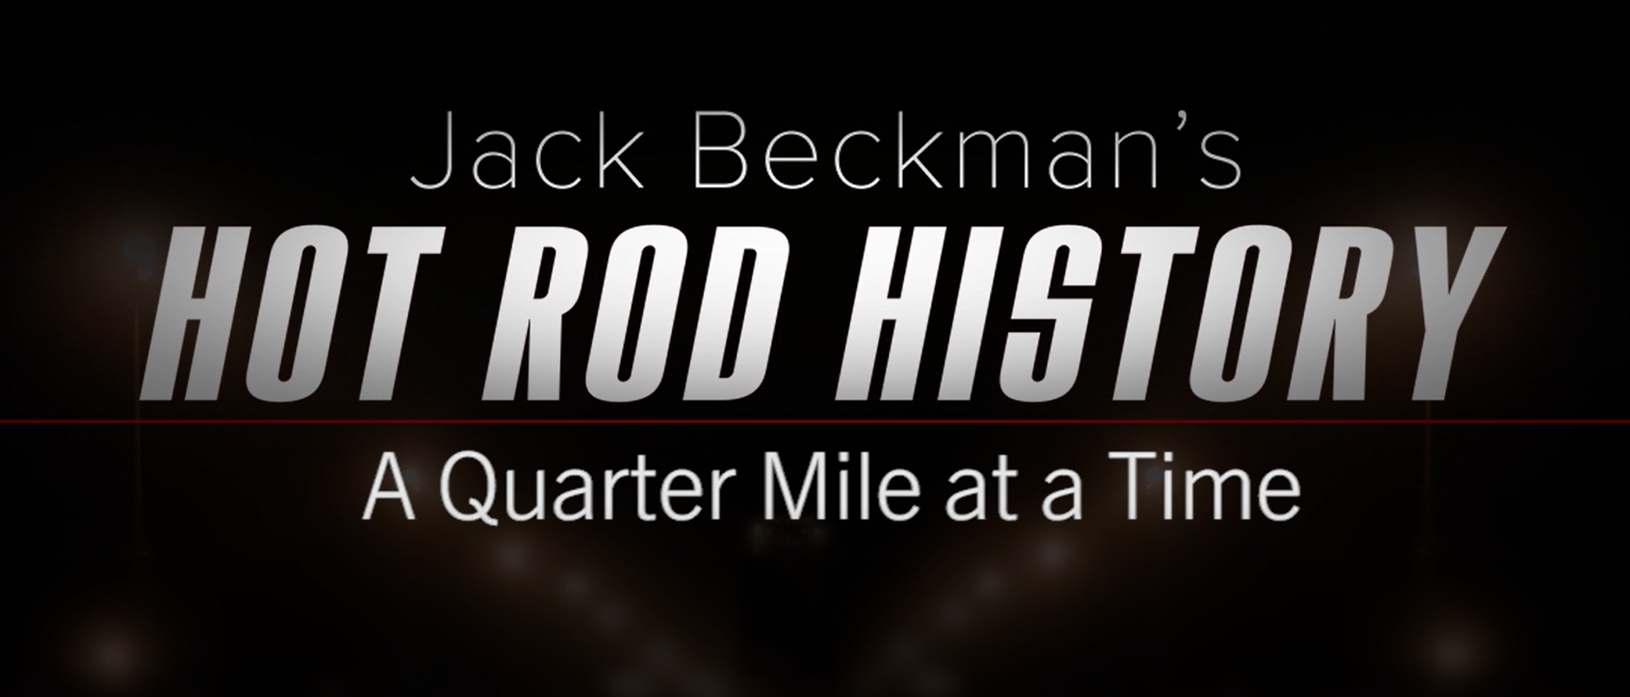 Hot Rod History A Quarter Mile at a Time: Jack Beckman – Preview